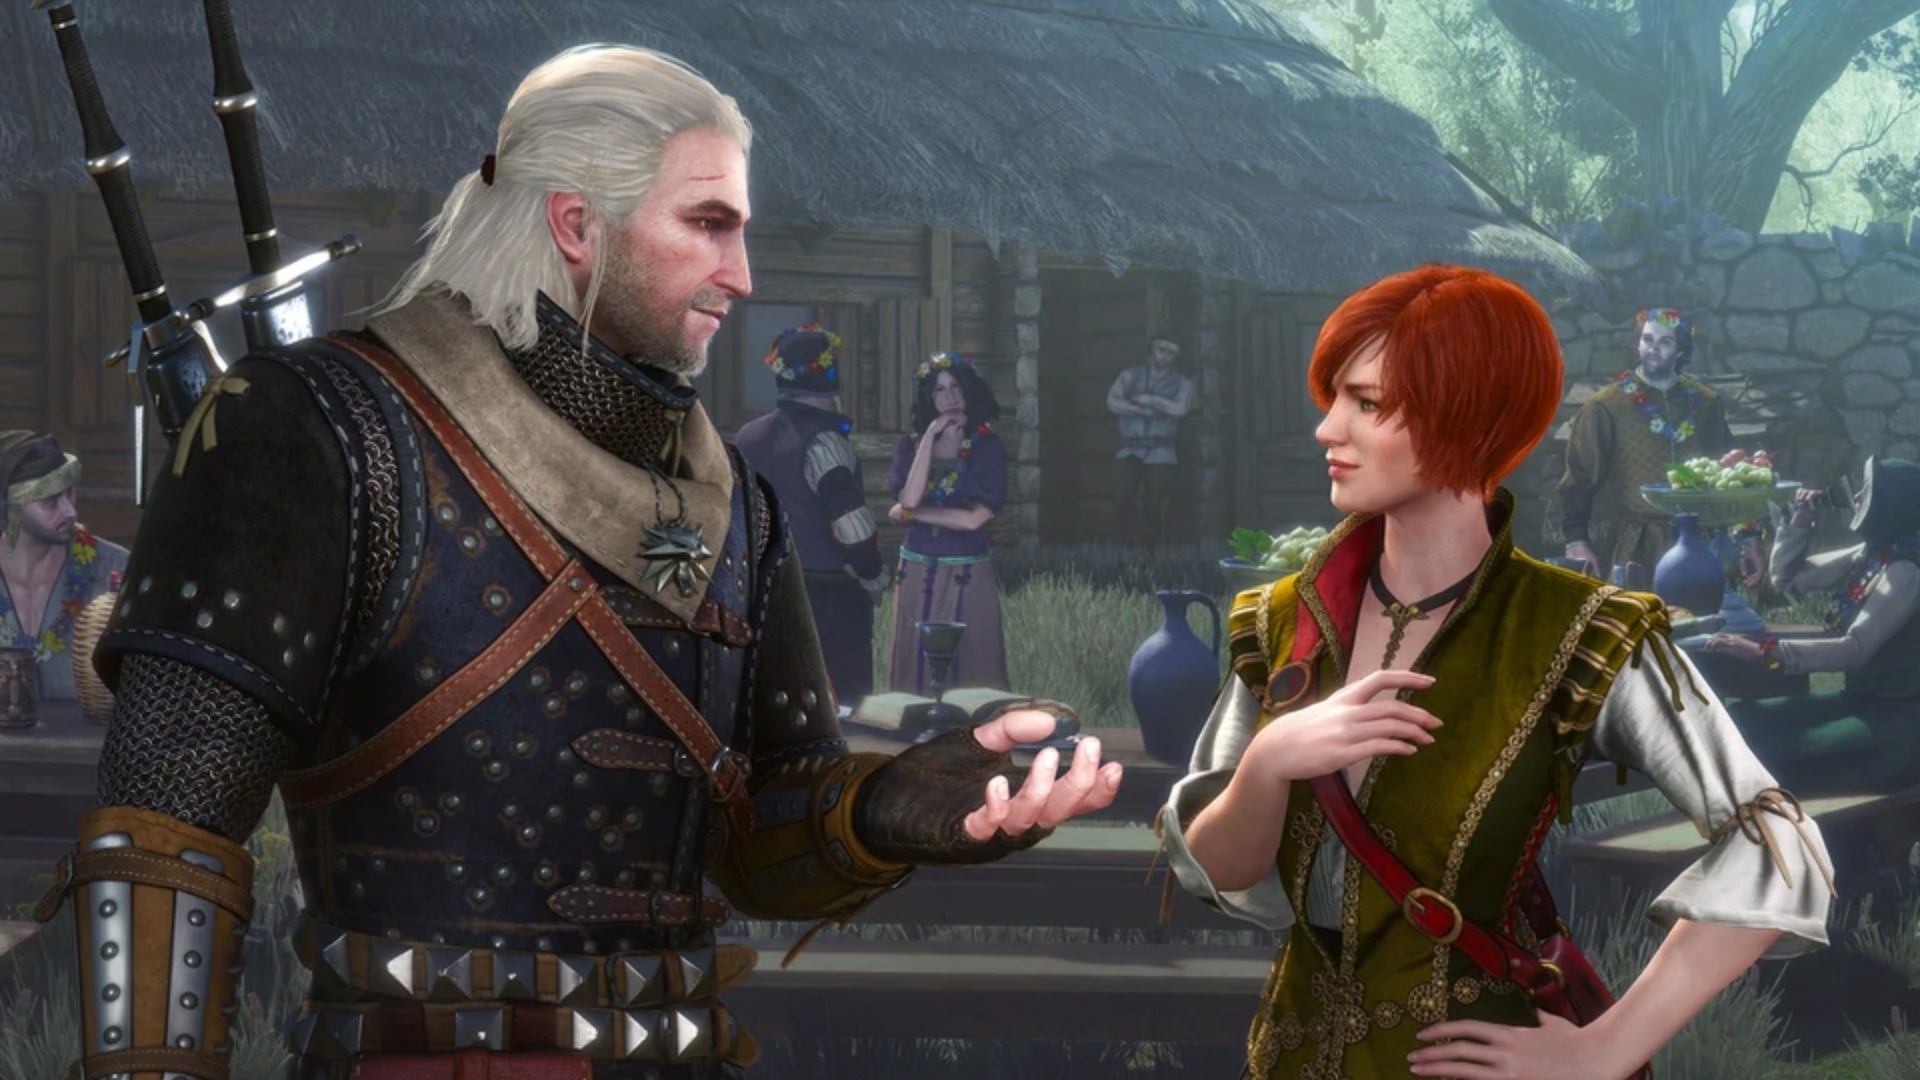 The future of The Witcher videogames